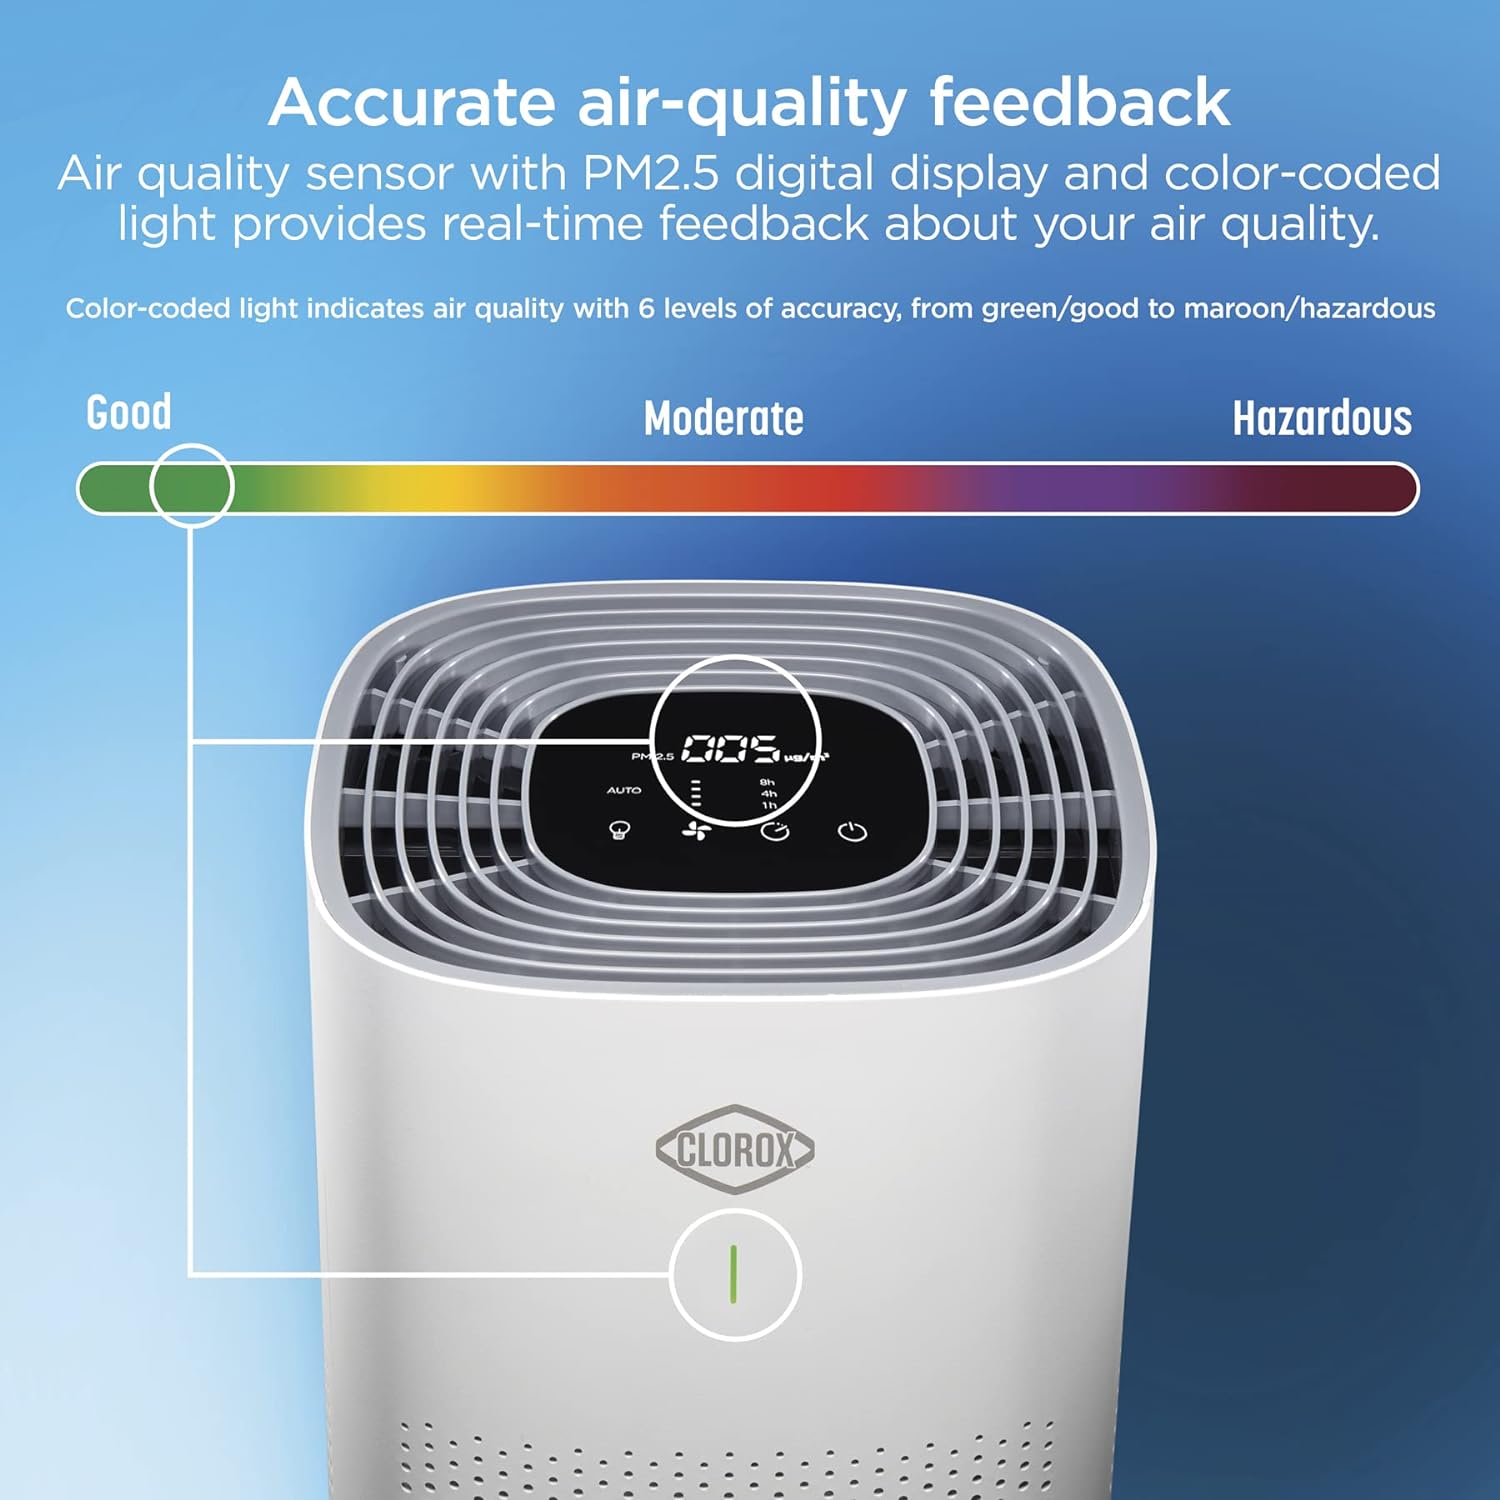 Report: Clorox Air Purifiers for Home